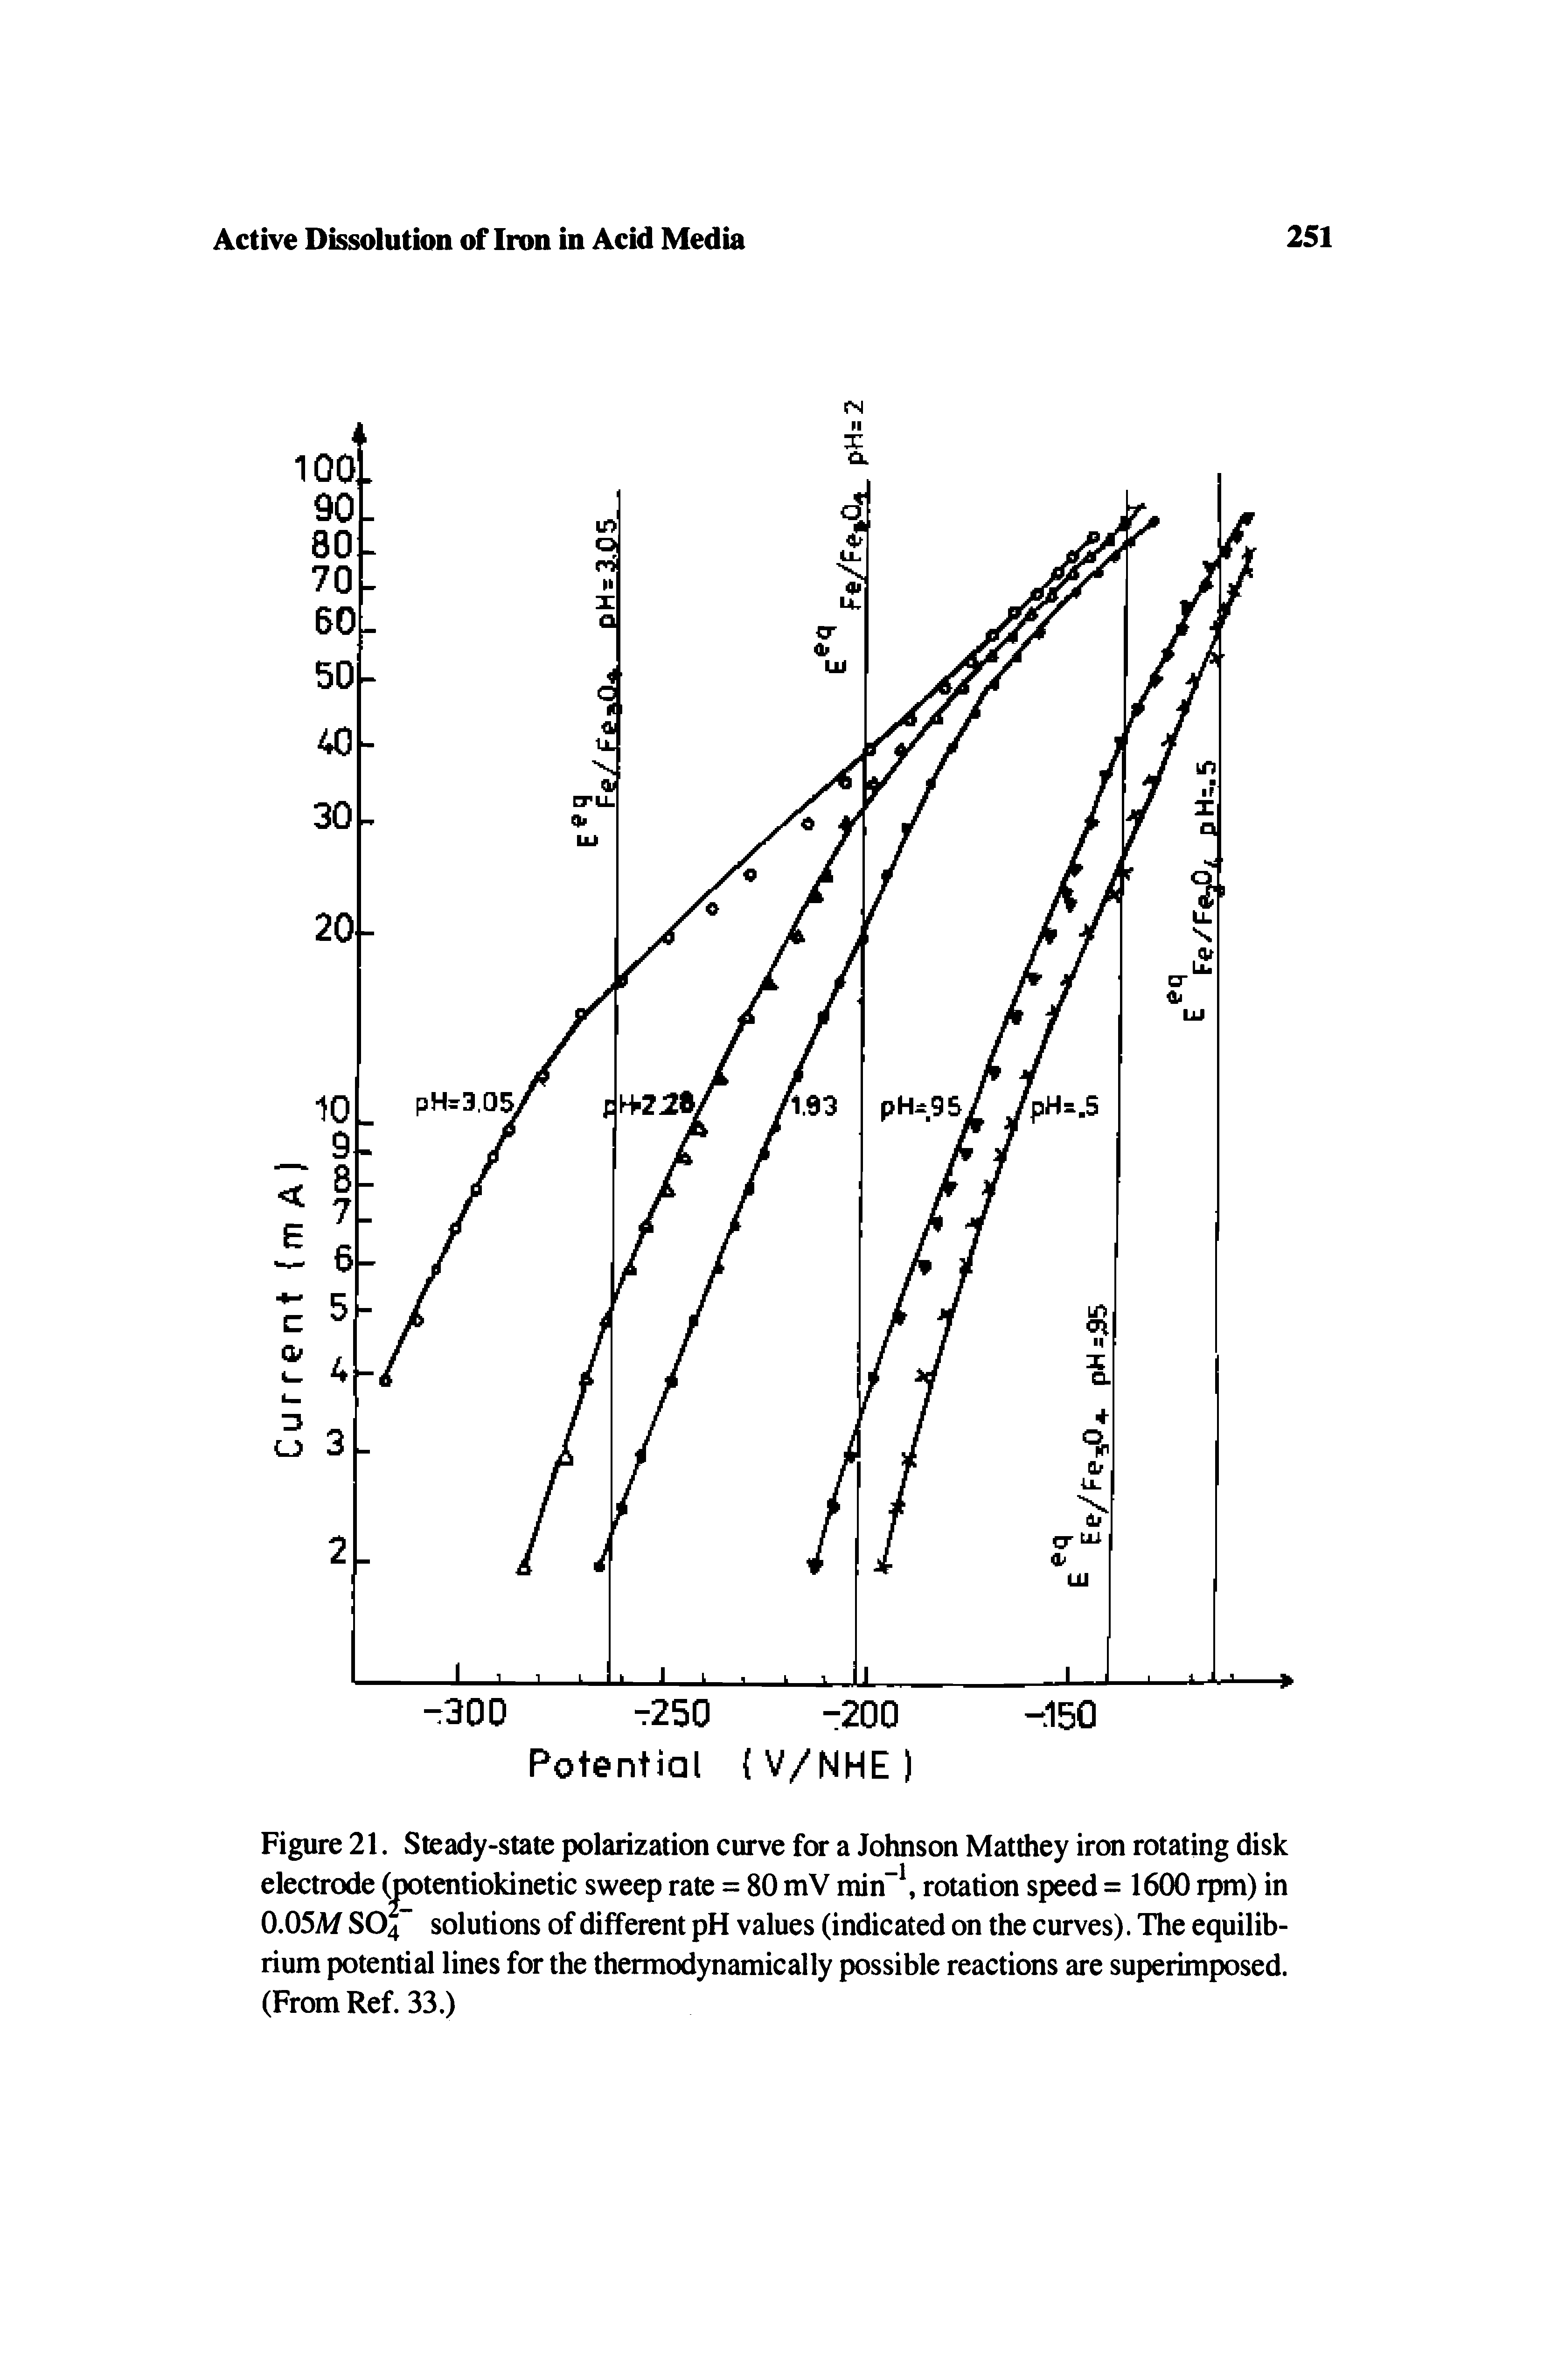 Figure 21. Steady-state polarization curve for a Johnson Matthey iron rotating disk electrode (jx)tentiokinetic sweep rate = 80 mV min" rotation speed = 1600 rpm) in 0.05M SO4 solutions of different pH values (indicated on the curves). The equilibrium potential lines for the thermodynamically possible reactions are superimposed. (From Ref. 33.)...